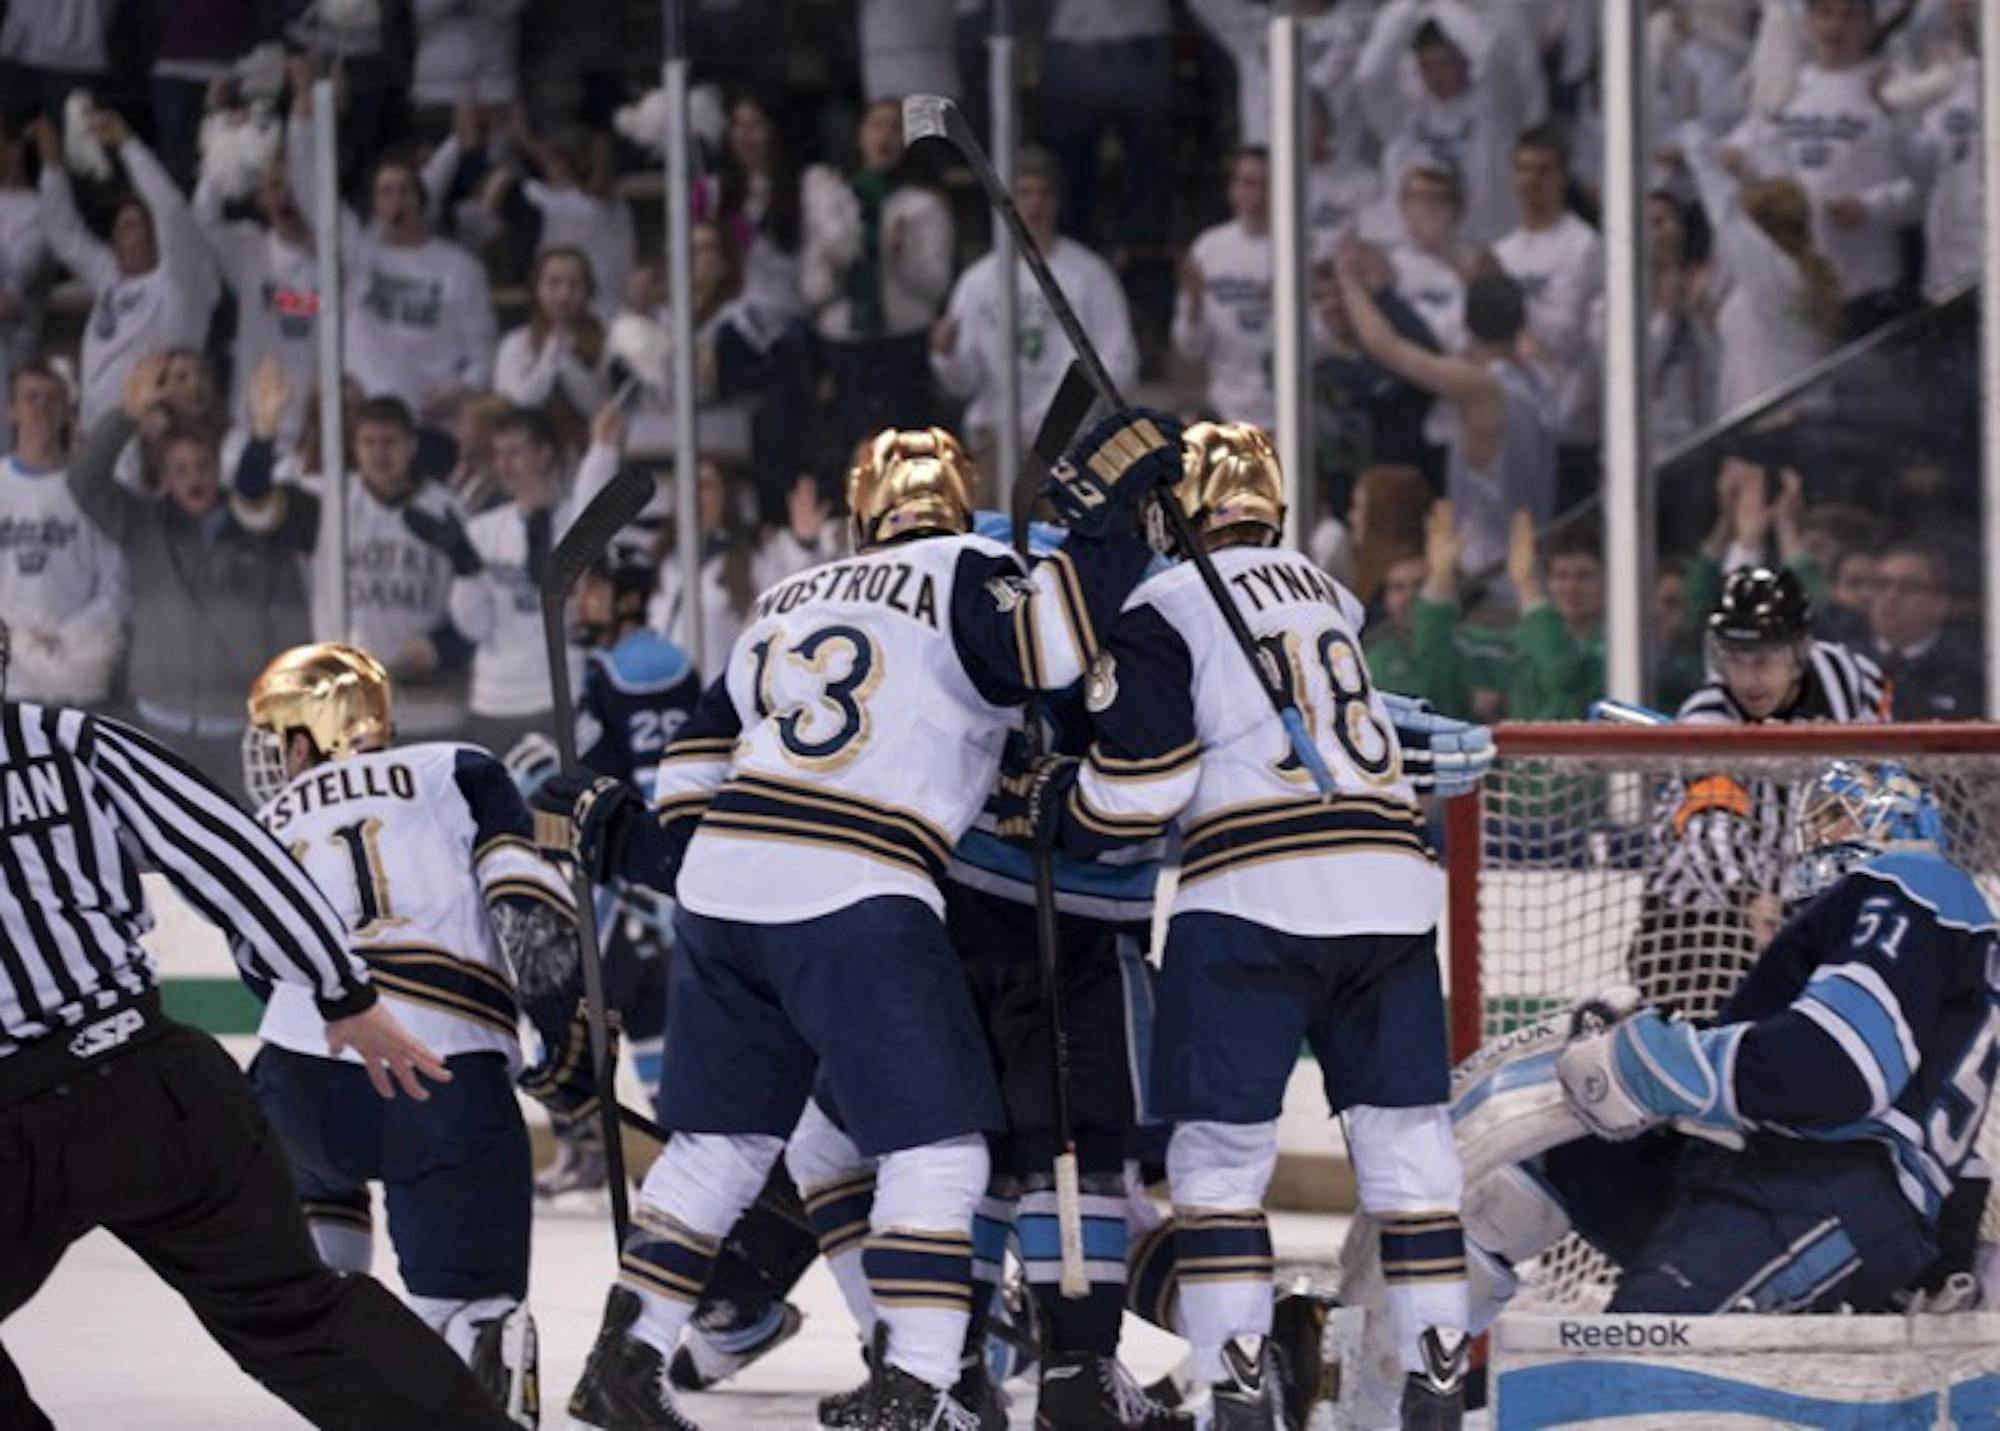 Freshman center Vince Hinostroza, center, and senior center T.J. Tynan jostle with Maine players during Maine’s 2-1 win over the Irish on Feb. 7.  A tying goal scored by senior left wing Jeff Costello was called off by the officials.